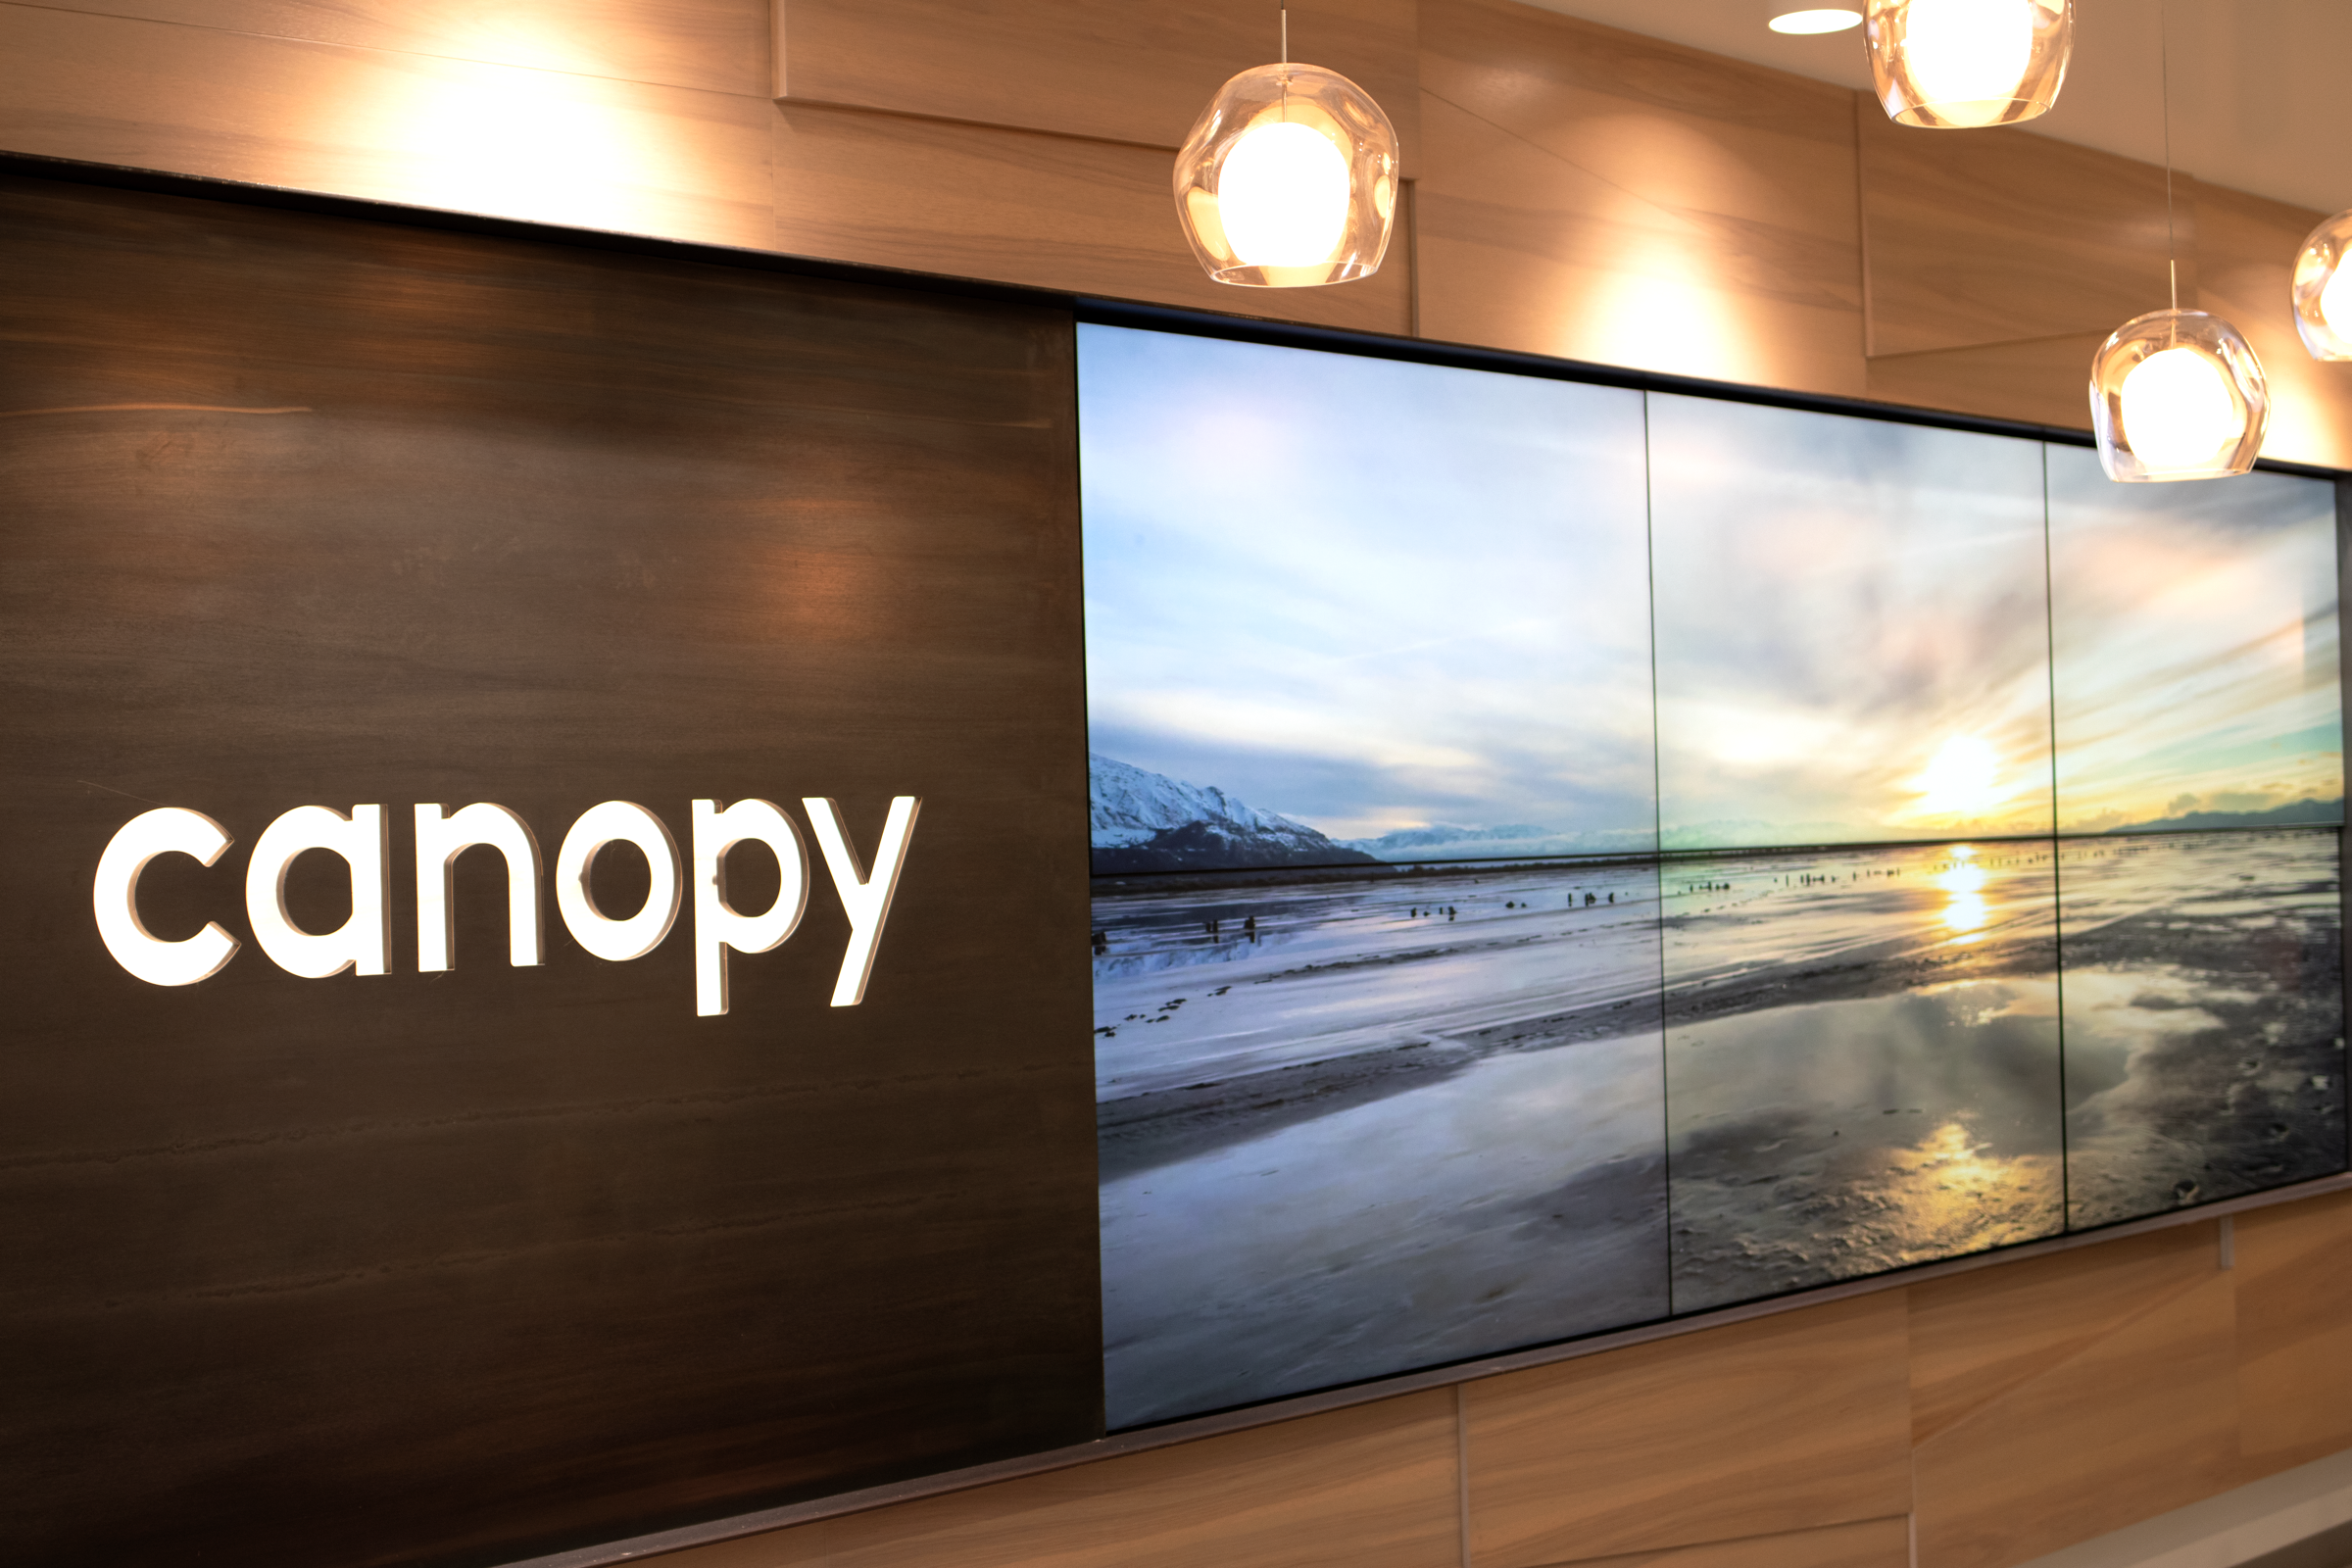 Canopy Announces Davis Bell as Its New CEO and Raises $13 Million in Funding